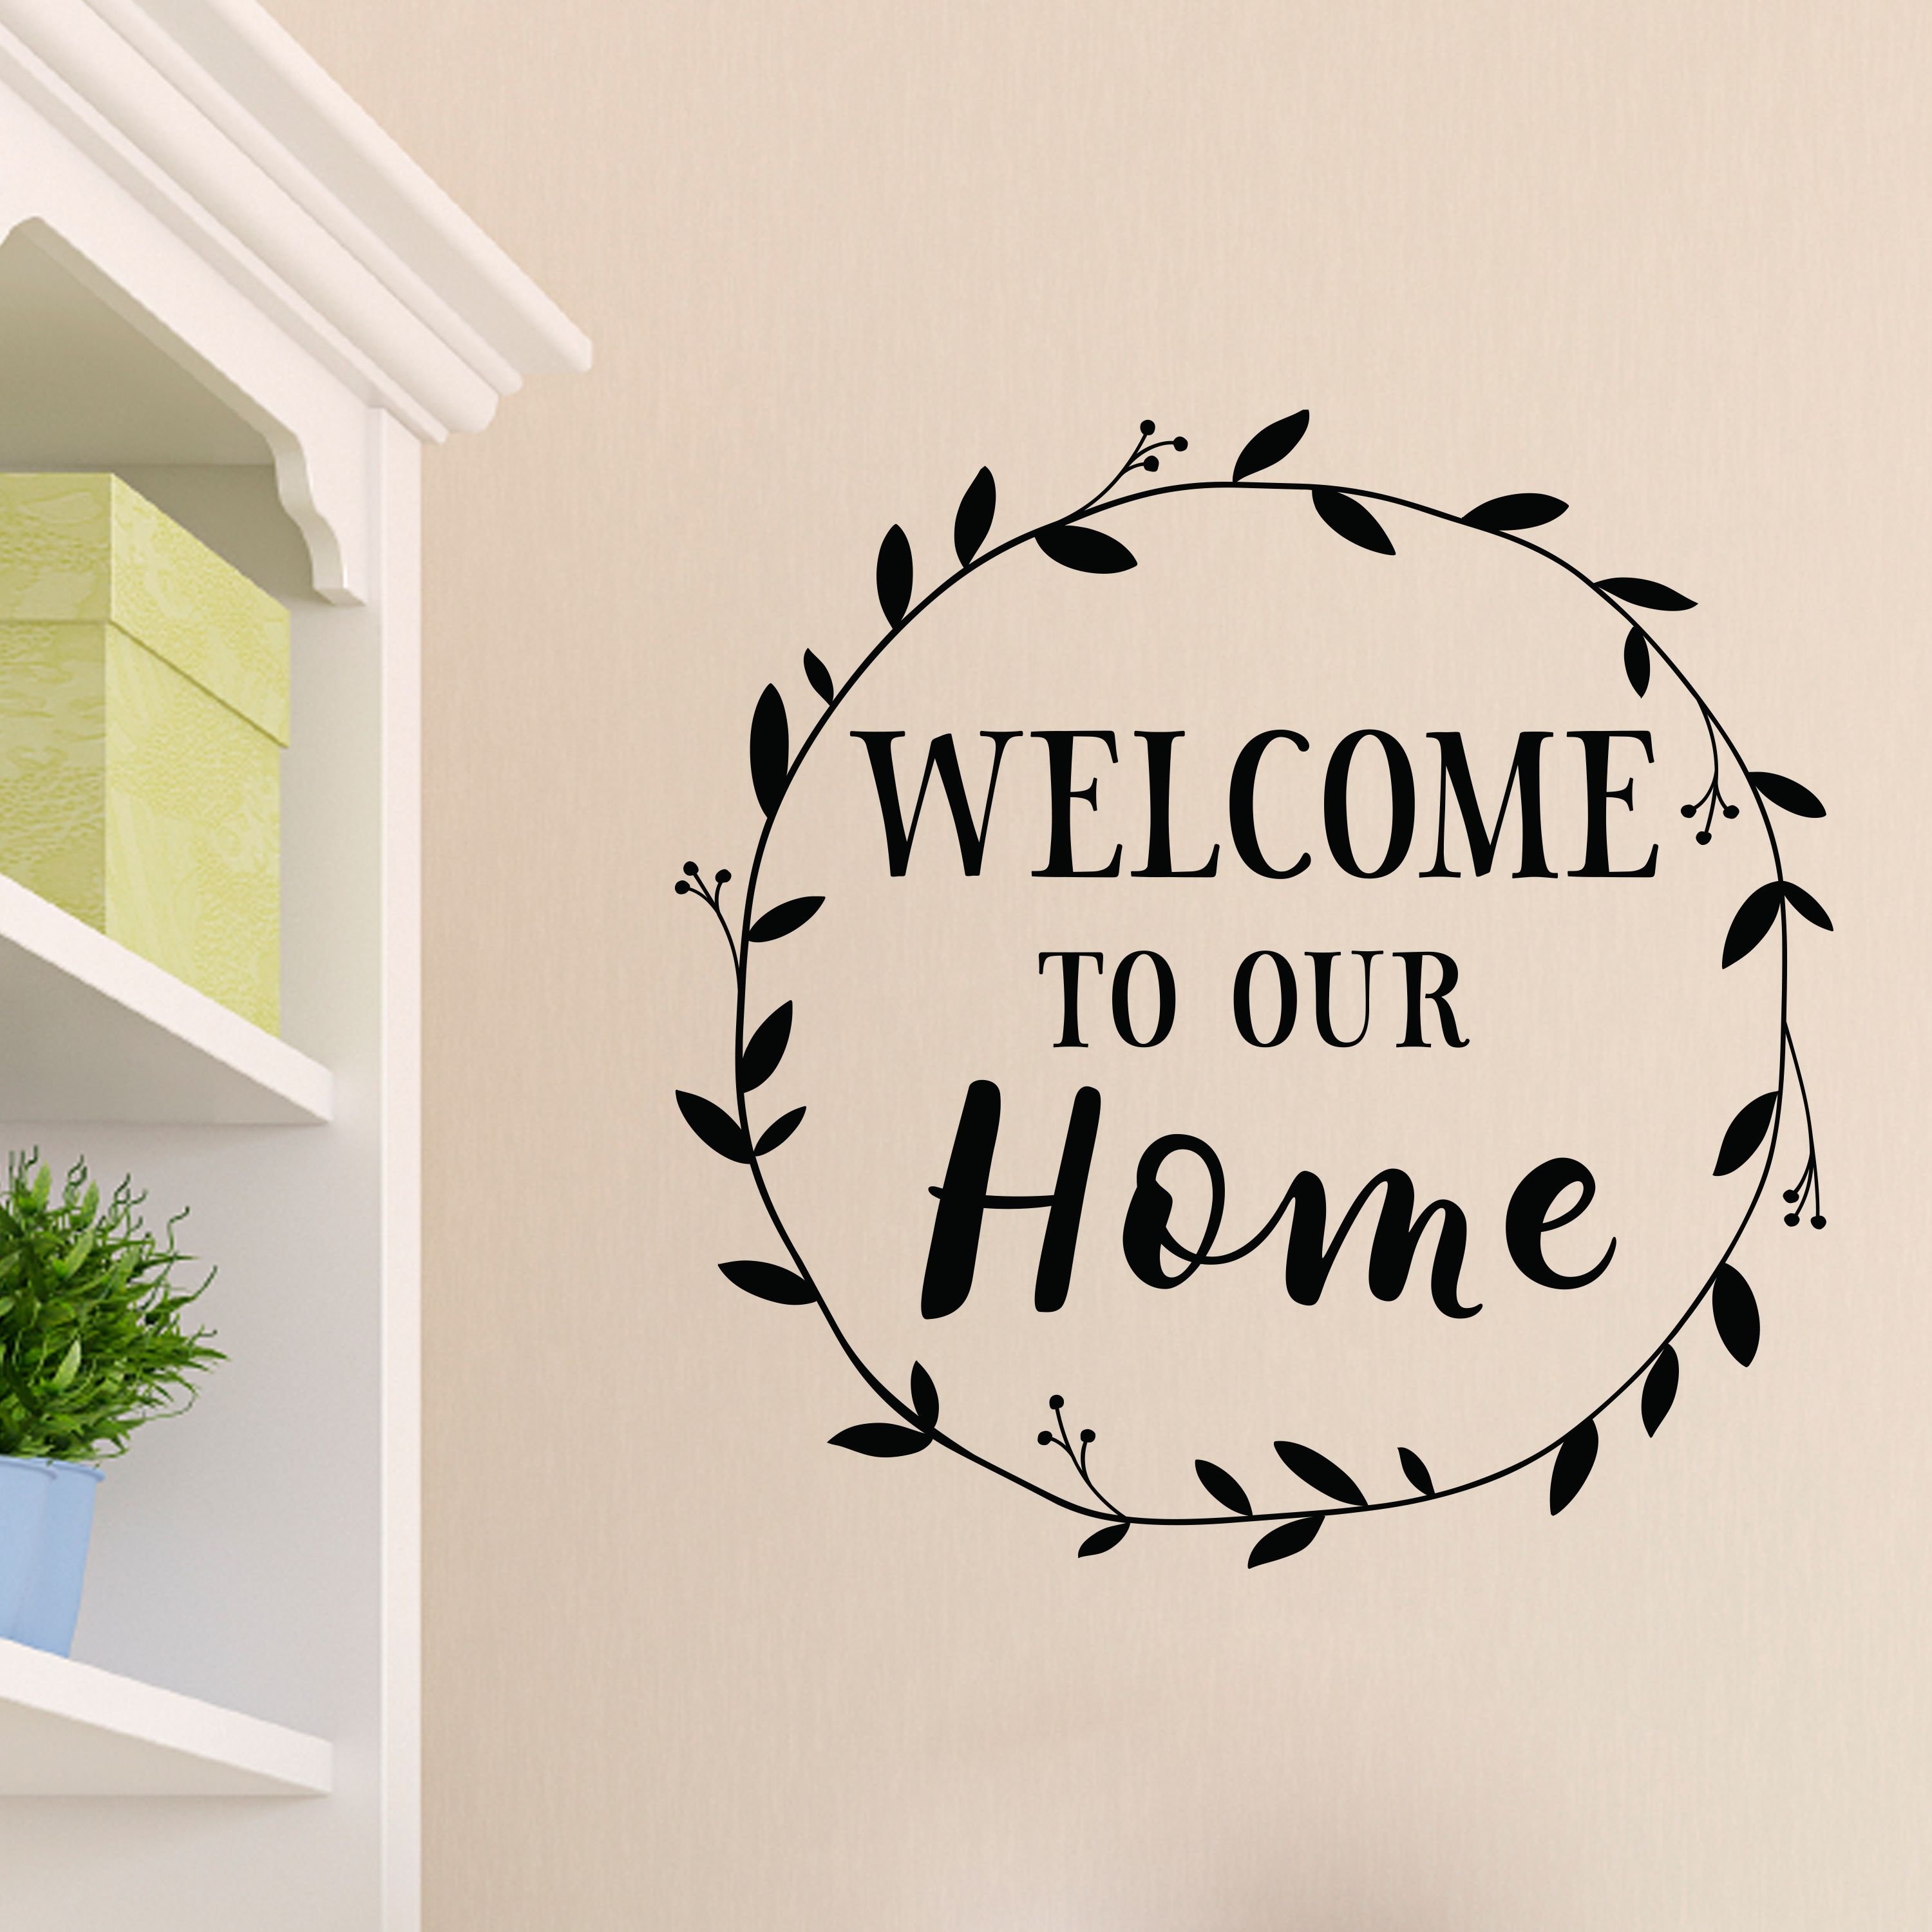 Welcome To Our Home Vinyl Wall Decal, Entry Wall Art, Picture Wall In 2017 Home Wall Art (View 14 of 20)